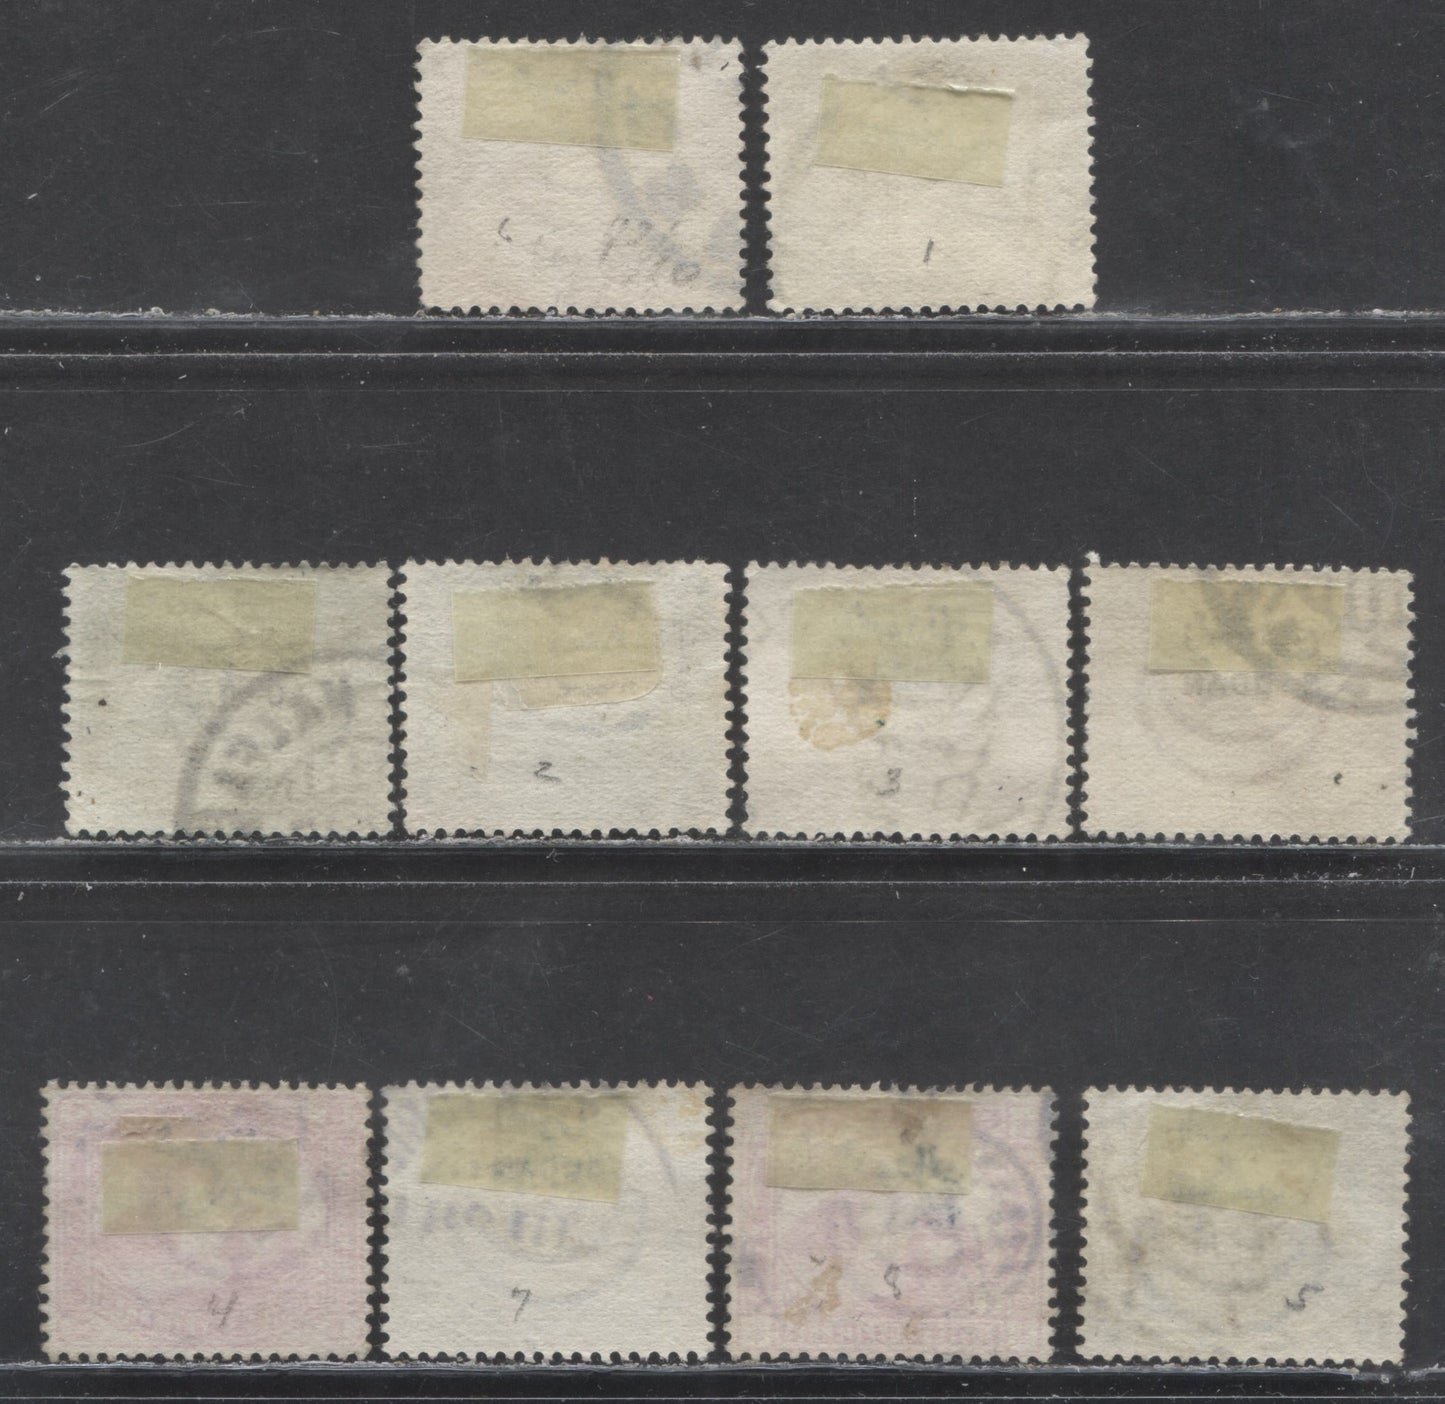 Lot 171 Sudan SC#1-8 1897 Overprints, Forged Overprints, 10 Fine/Very Fine Used Singles, 2022 Scott Classic Cat. $5 USD, Click on Listing to See ALL Pictures, Estimated Value $5 USD